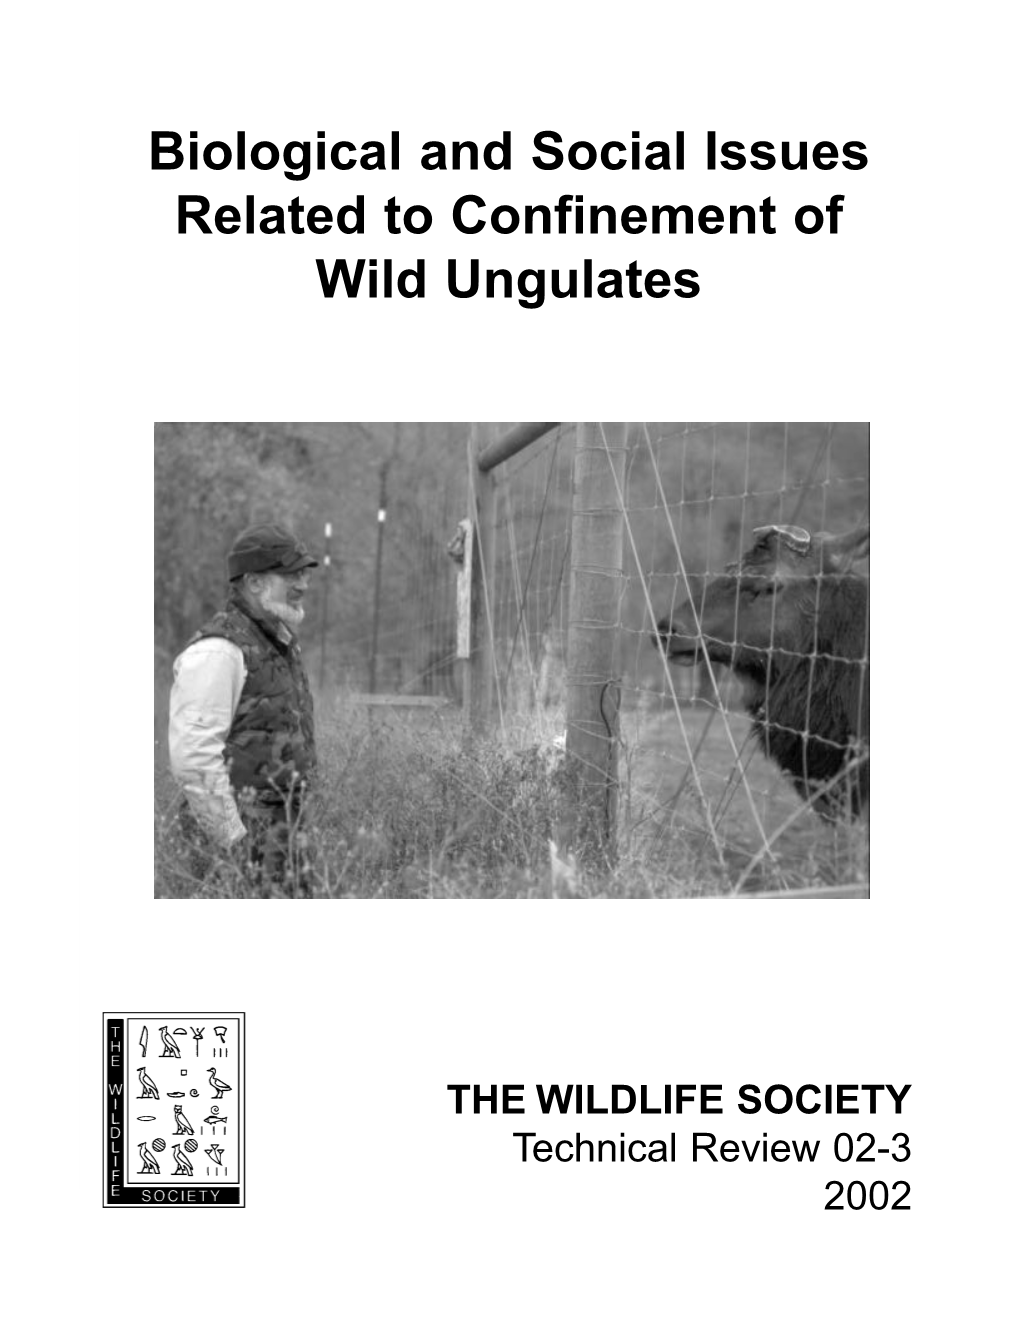 Biological and Social Issues Related to Confinement of Wild Ungulates